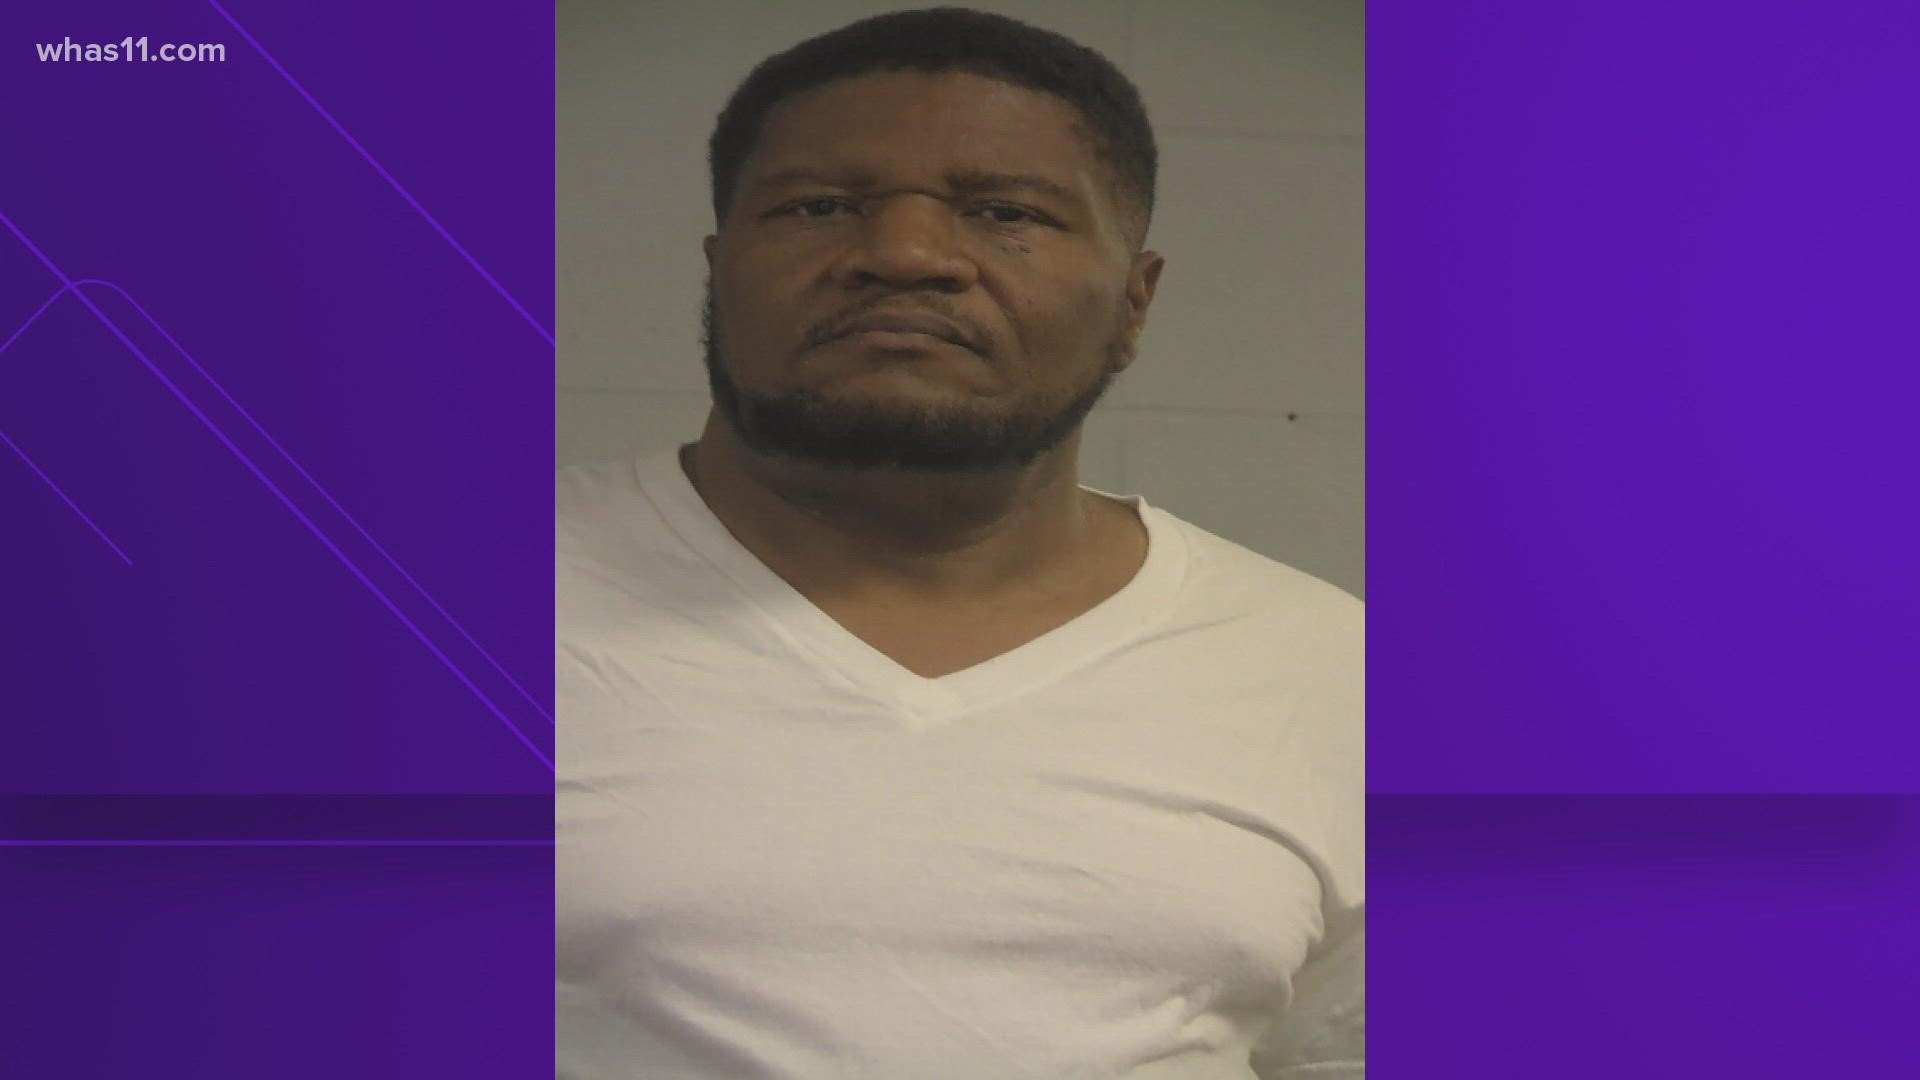 Richmond Booker is facing charges after police claim he enticed a 16-year-old to perform sexual acts for money.